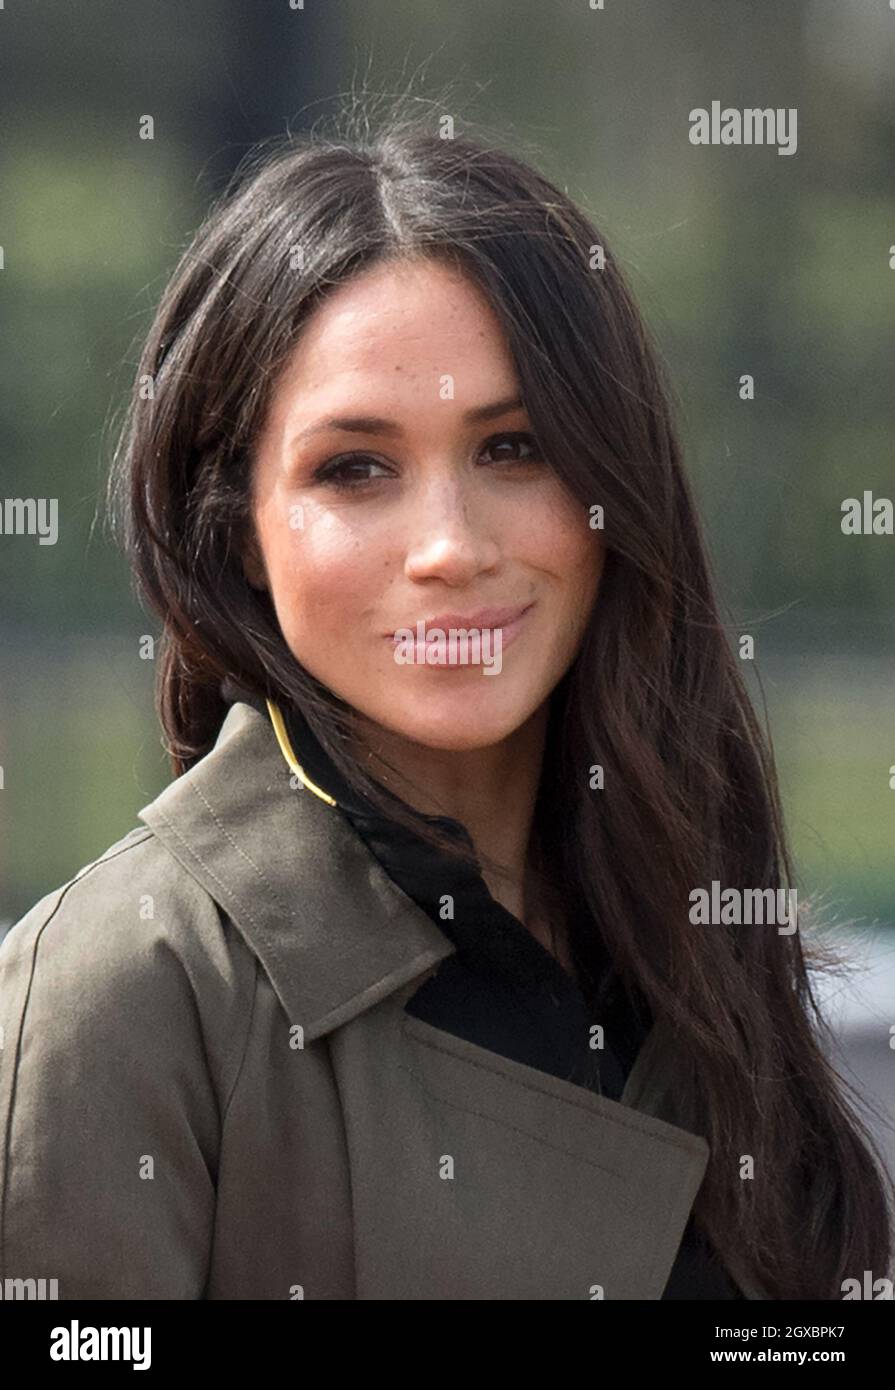 Meghan Markle attends the UK team trials for the Invictus Games in Sydney 2018  at the University of Bath Sports Training Village on April 6, 2018.   The Invictus Games is the only international sports event for wounded, injured and sick servicemen and women, both serving and veteran. The Games use the power of sport to inspire recovery, support rehabilitation and generate a wider understanding and respect of all those who serve their country. Stock Photo